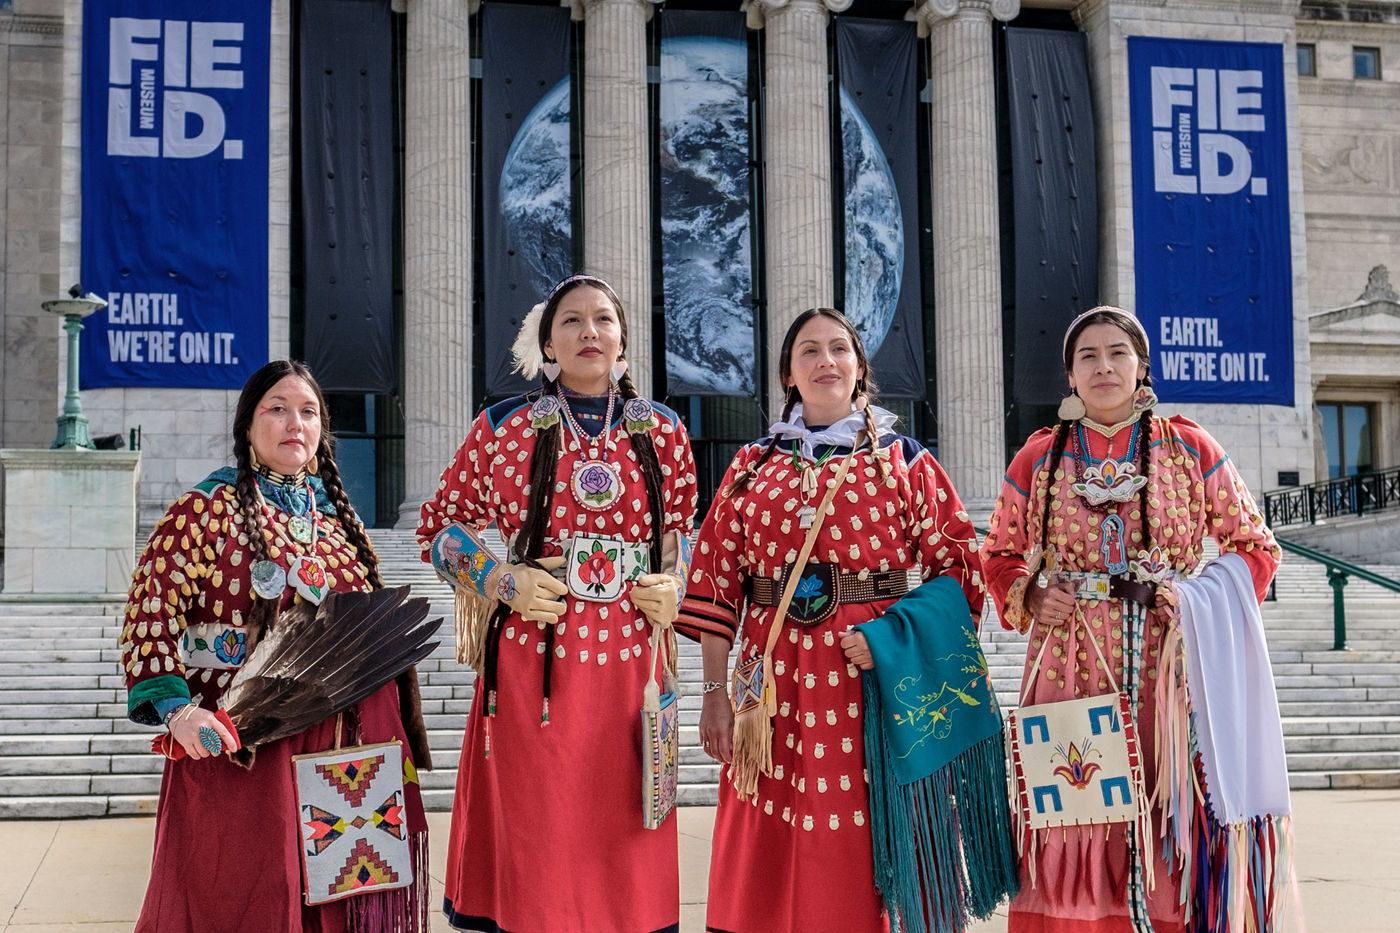 Four women stand with confidence in front of a grand marble museum façade. They each wear a long red dress with gold dot patterns and hold various bags, blankets, and belts with distinctive geometric patterns. Each woman’s long brown hair is braided in two low pigtails.